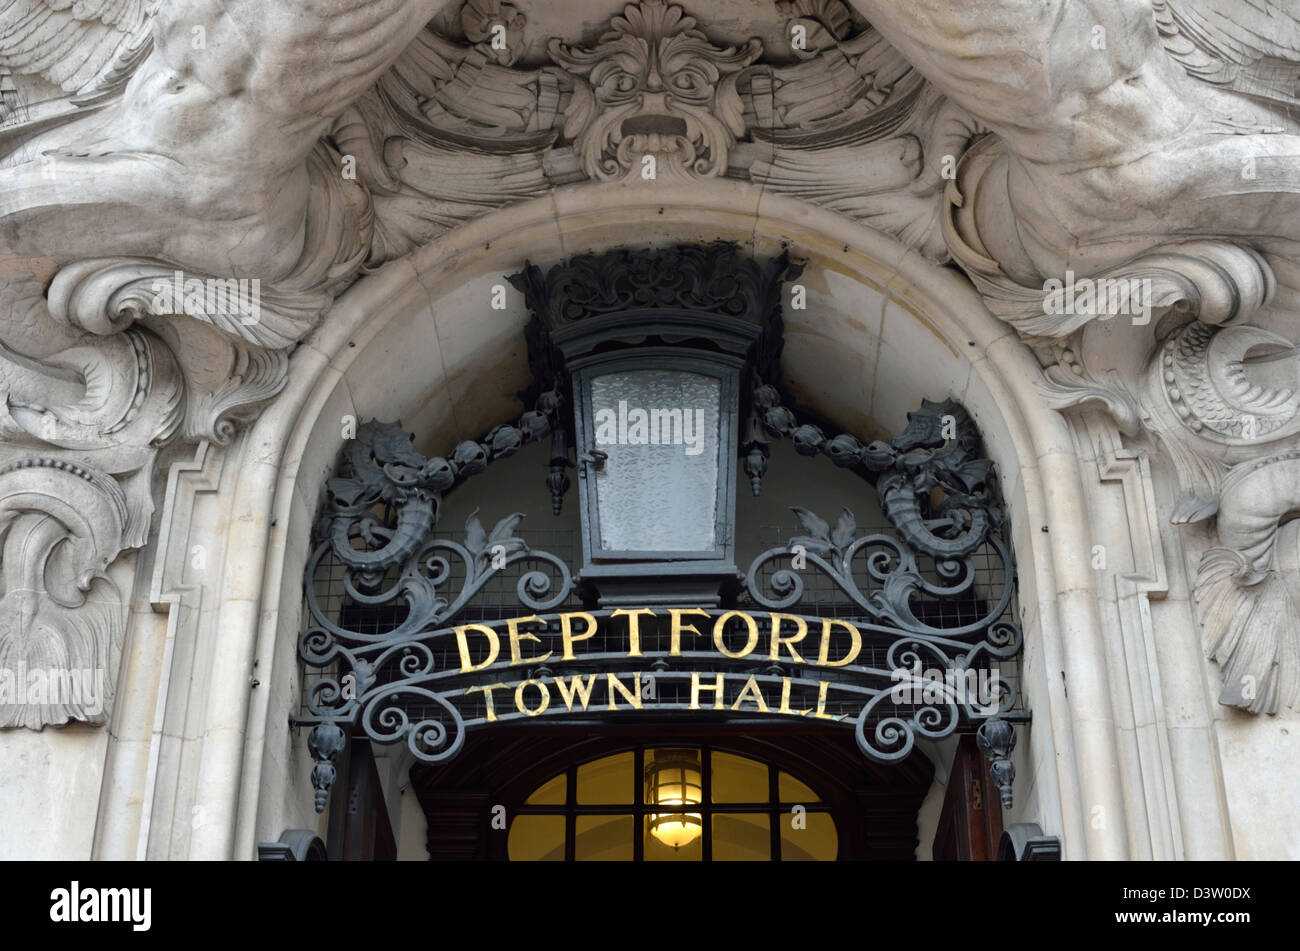 Deptford Town Hall Building, New Cross, London, UK Stock Photo